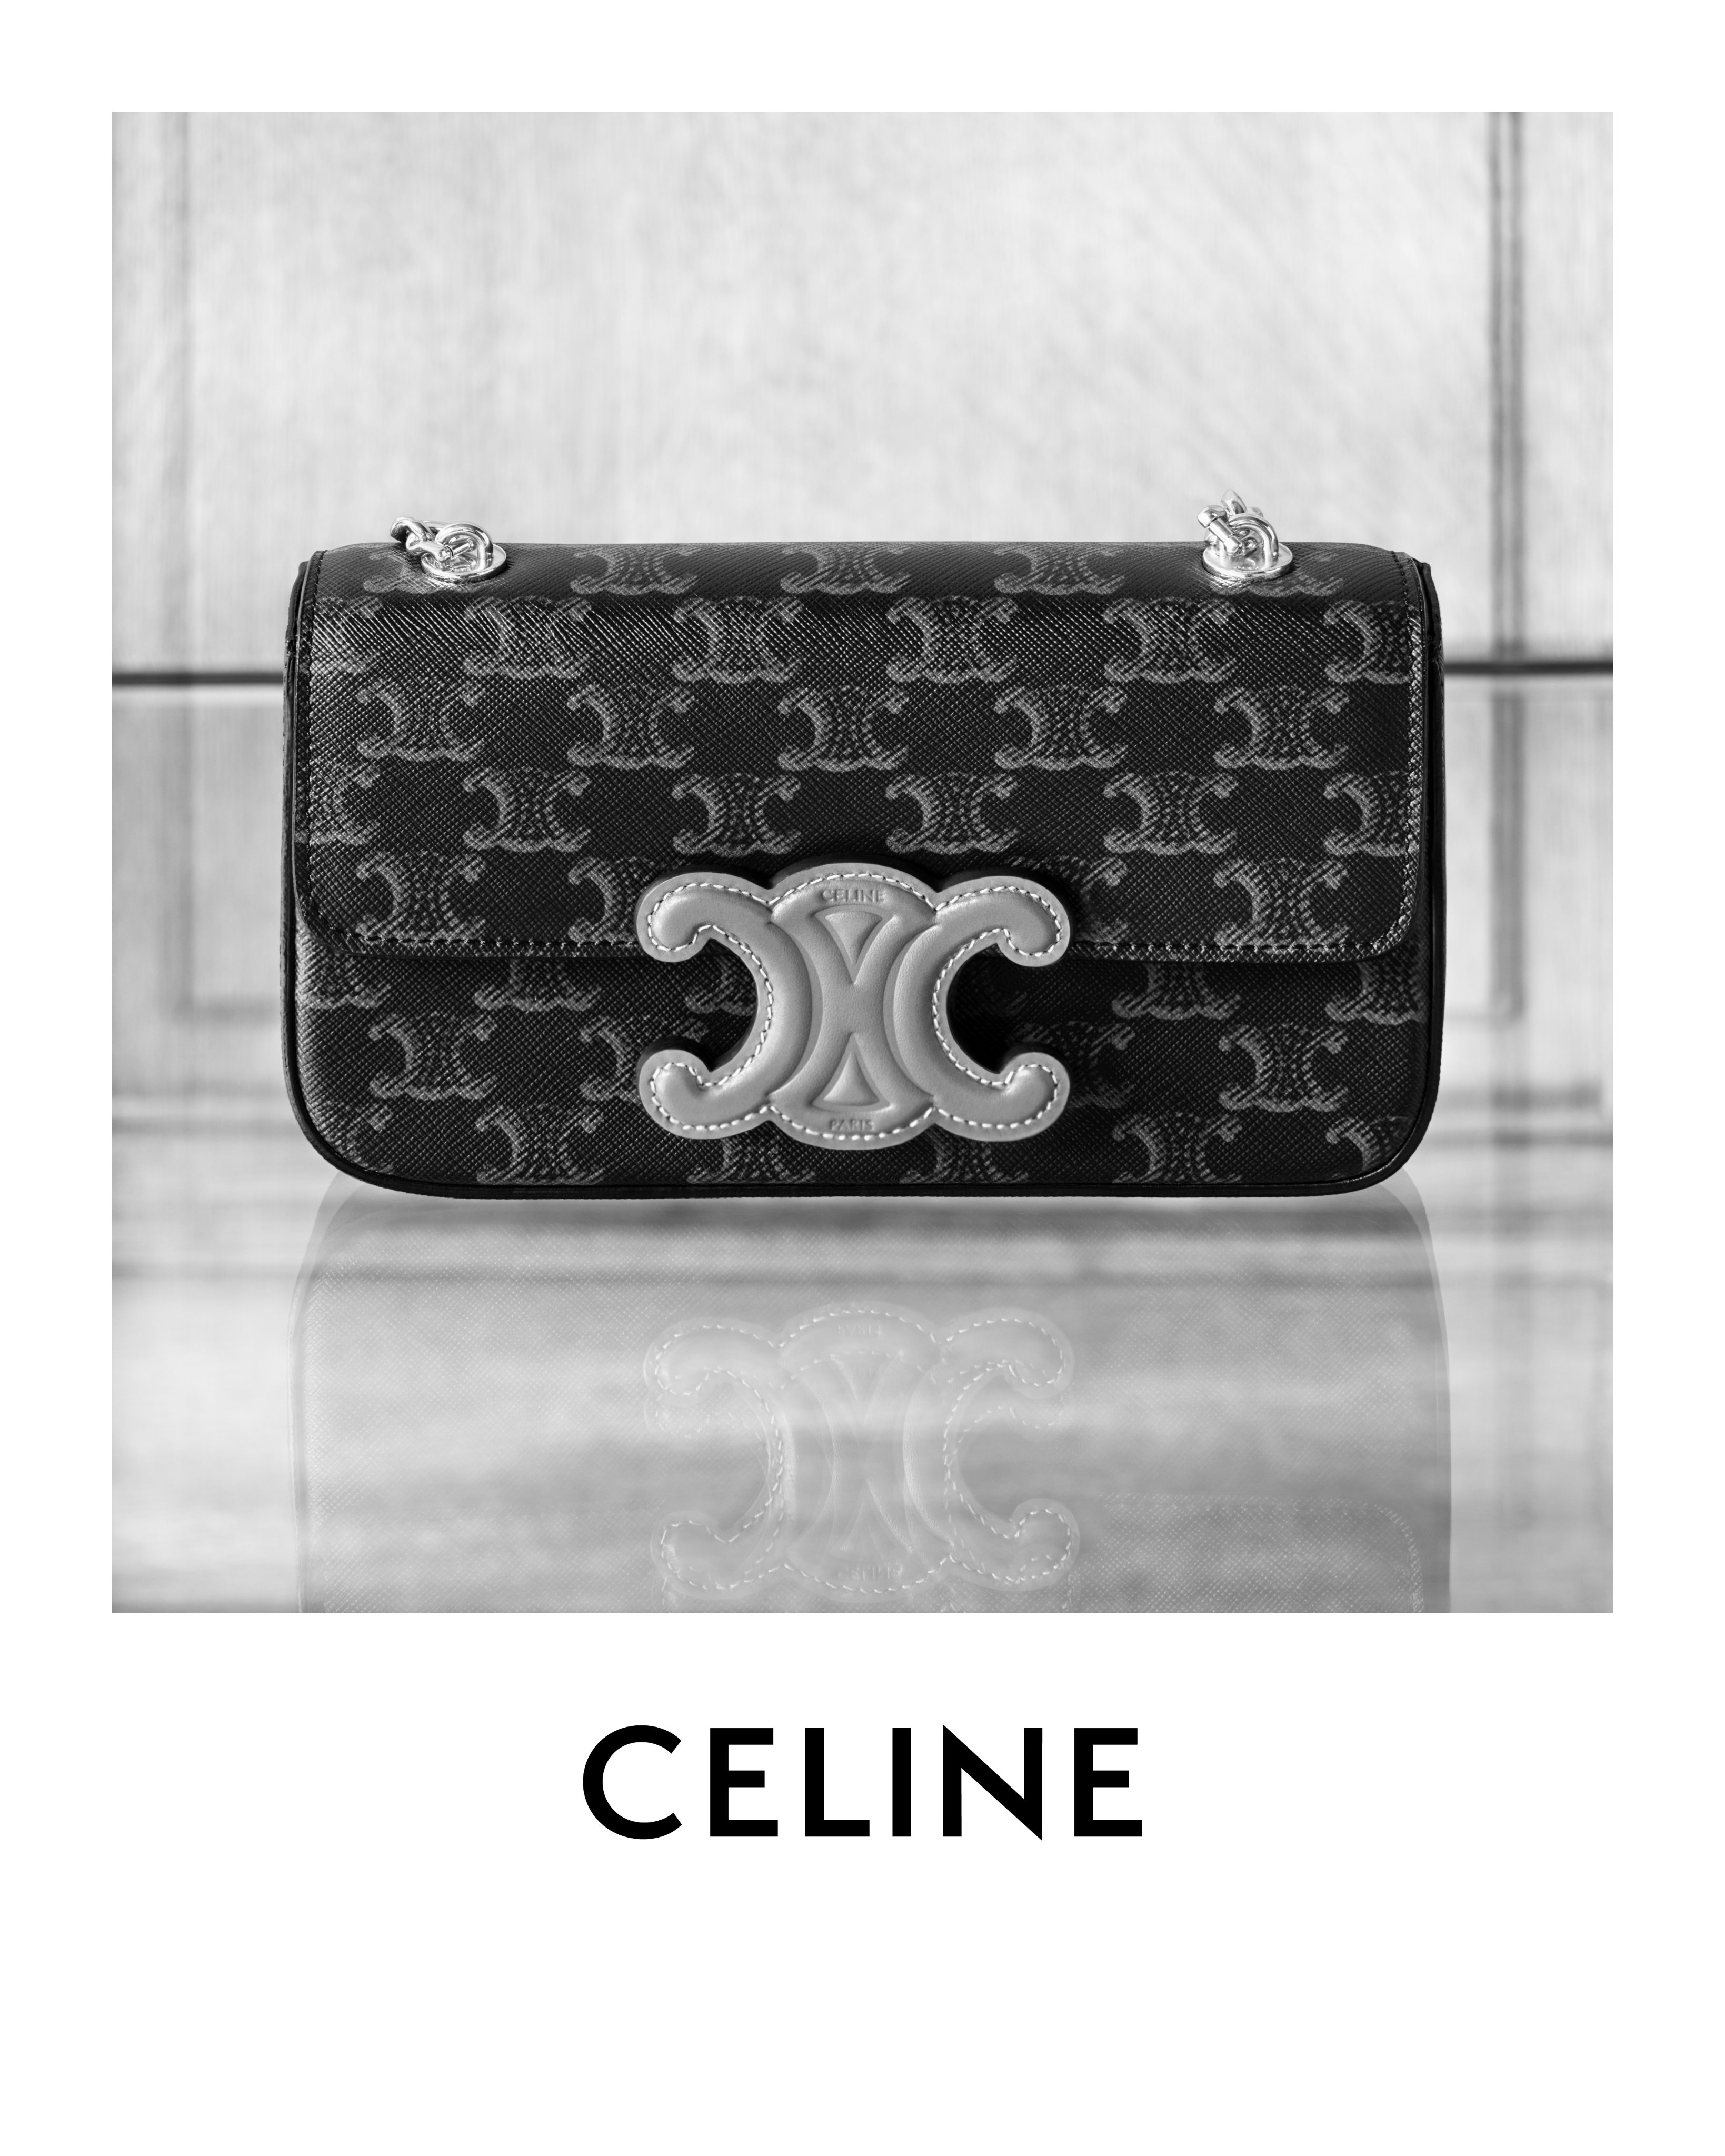 CELINE on X: CELINE WOMEN SUMMER 22 BAIE DES ANGES INTRODUCING THE NEW CELINE  BAG CELINE CHAIN SHOULDER BAG CUIR TRIOMPHE COLLECTION AVAILABLE NOW IN  STORE AND ON  PORTRAIT OF A